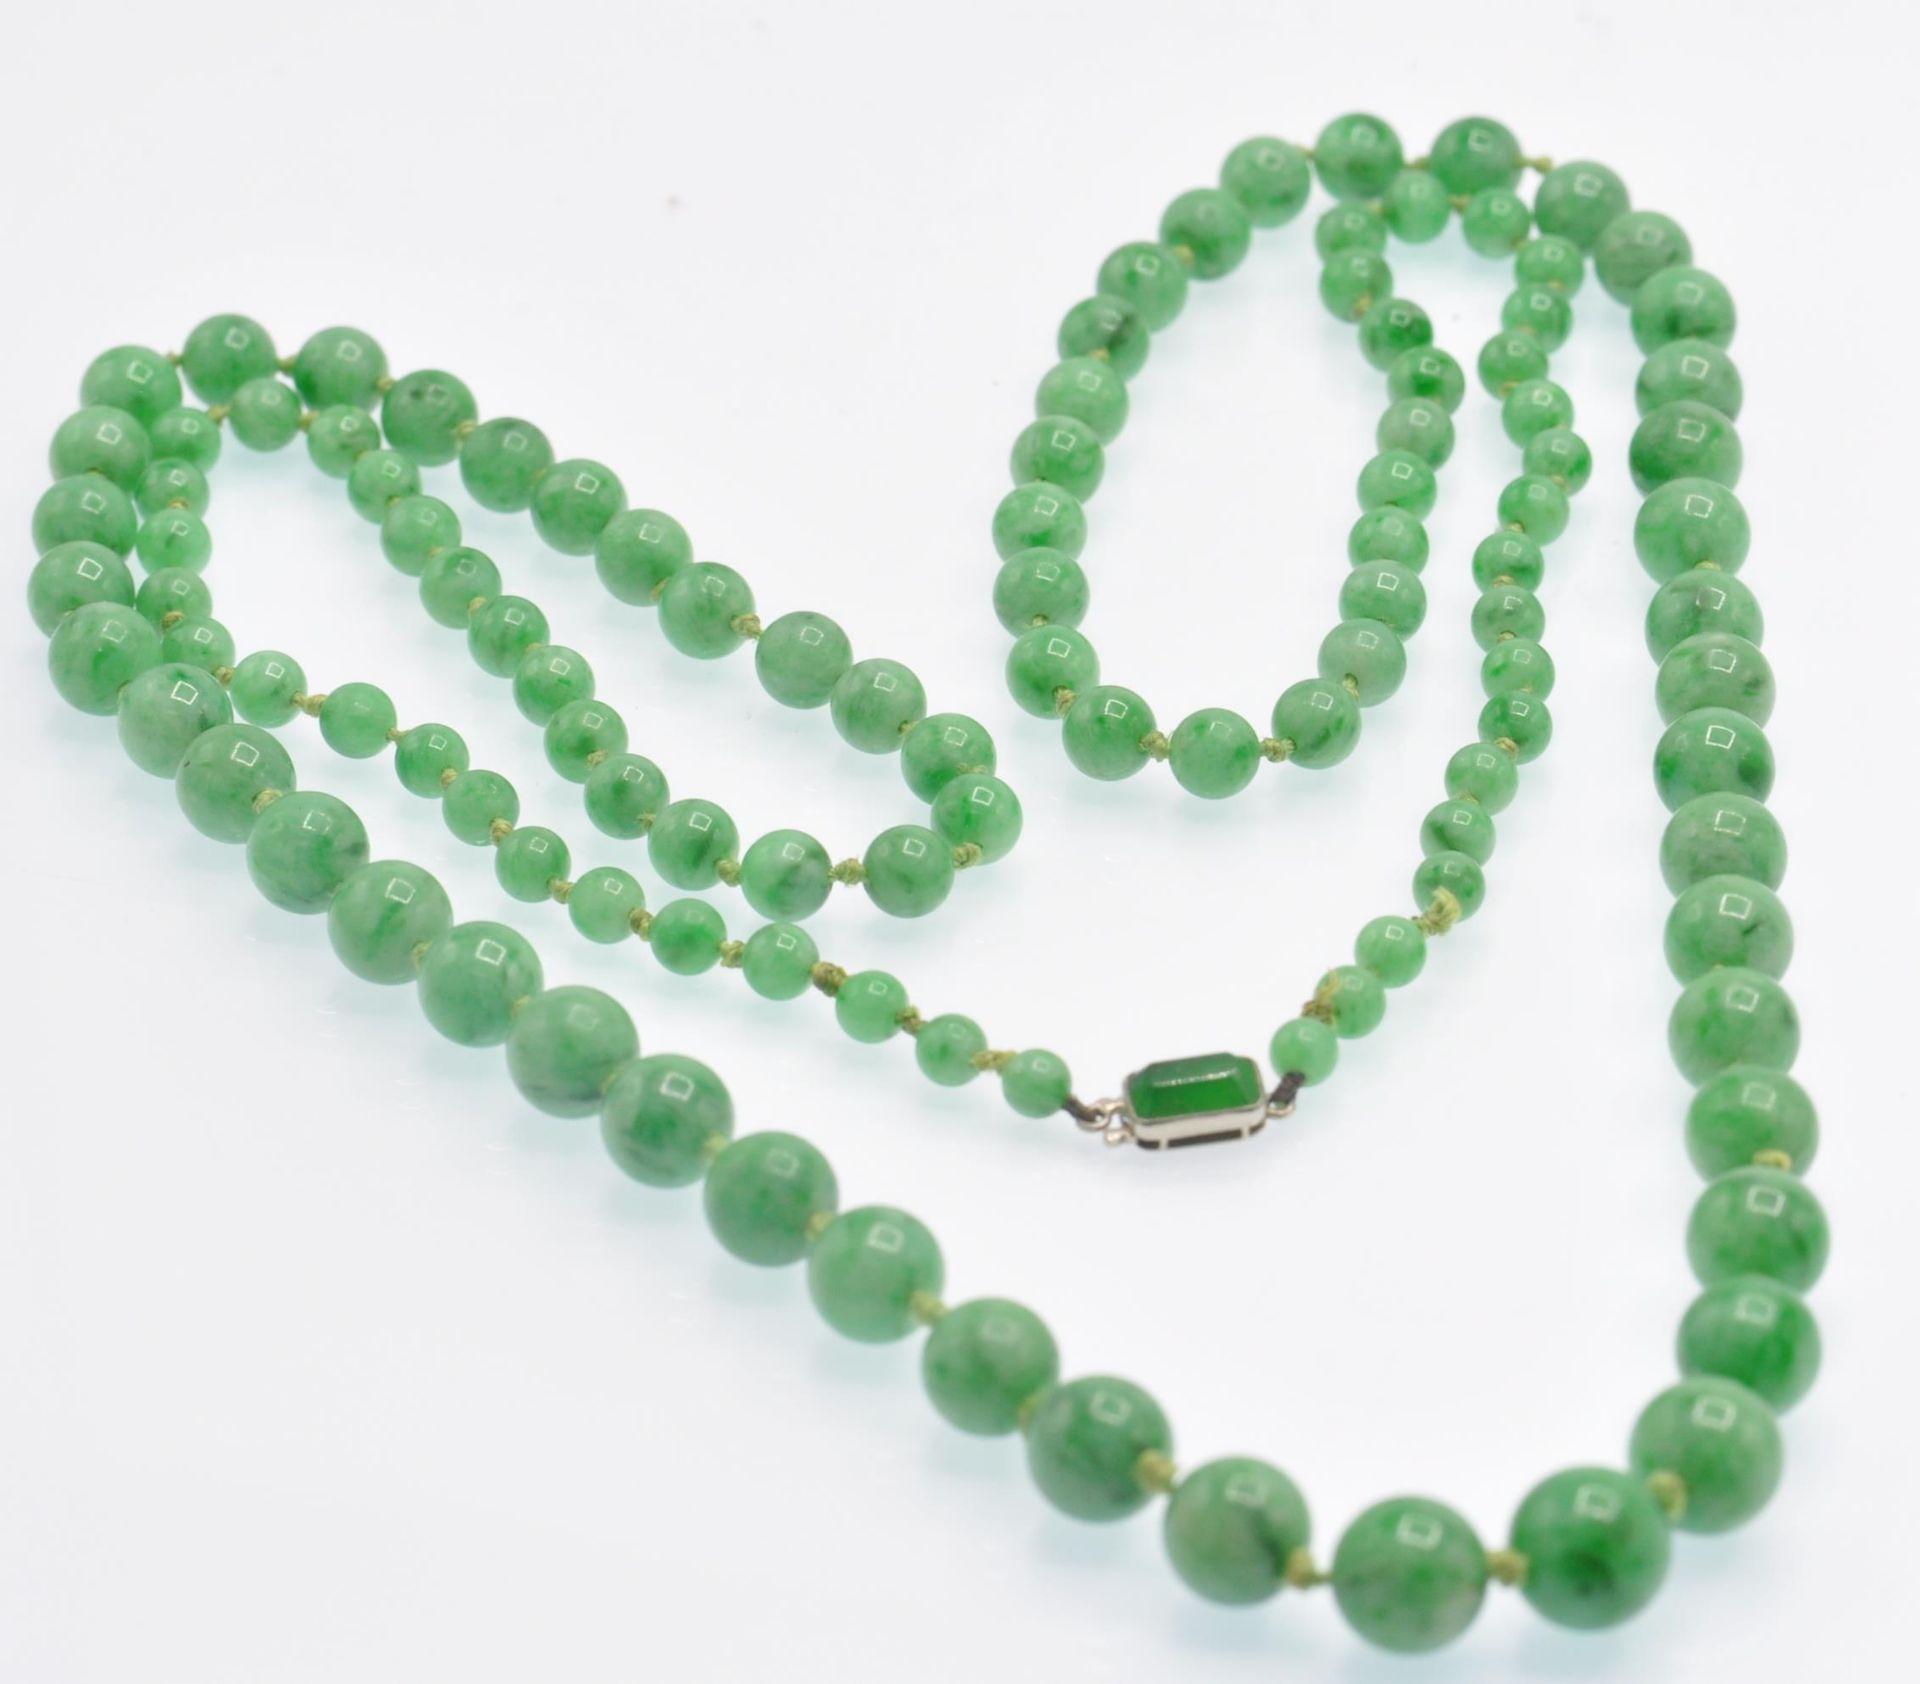 An Antique Jade Bead Necklace - Image 3 of 6